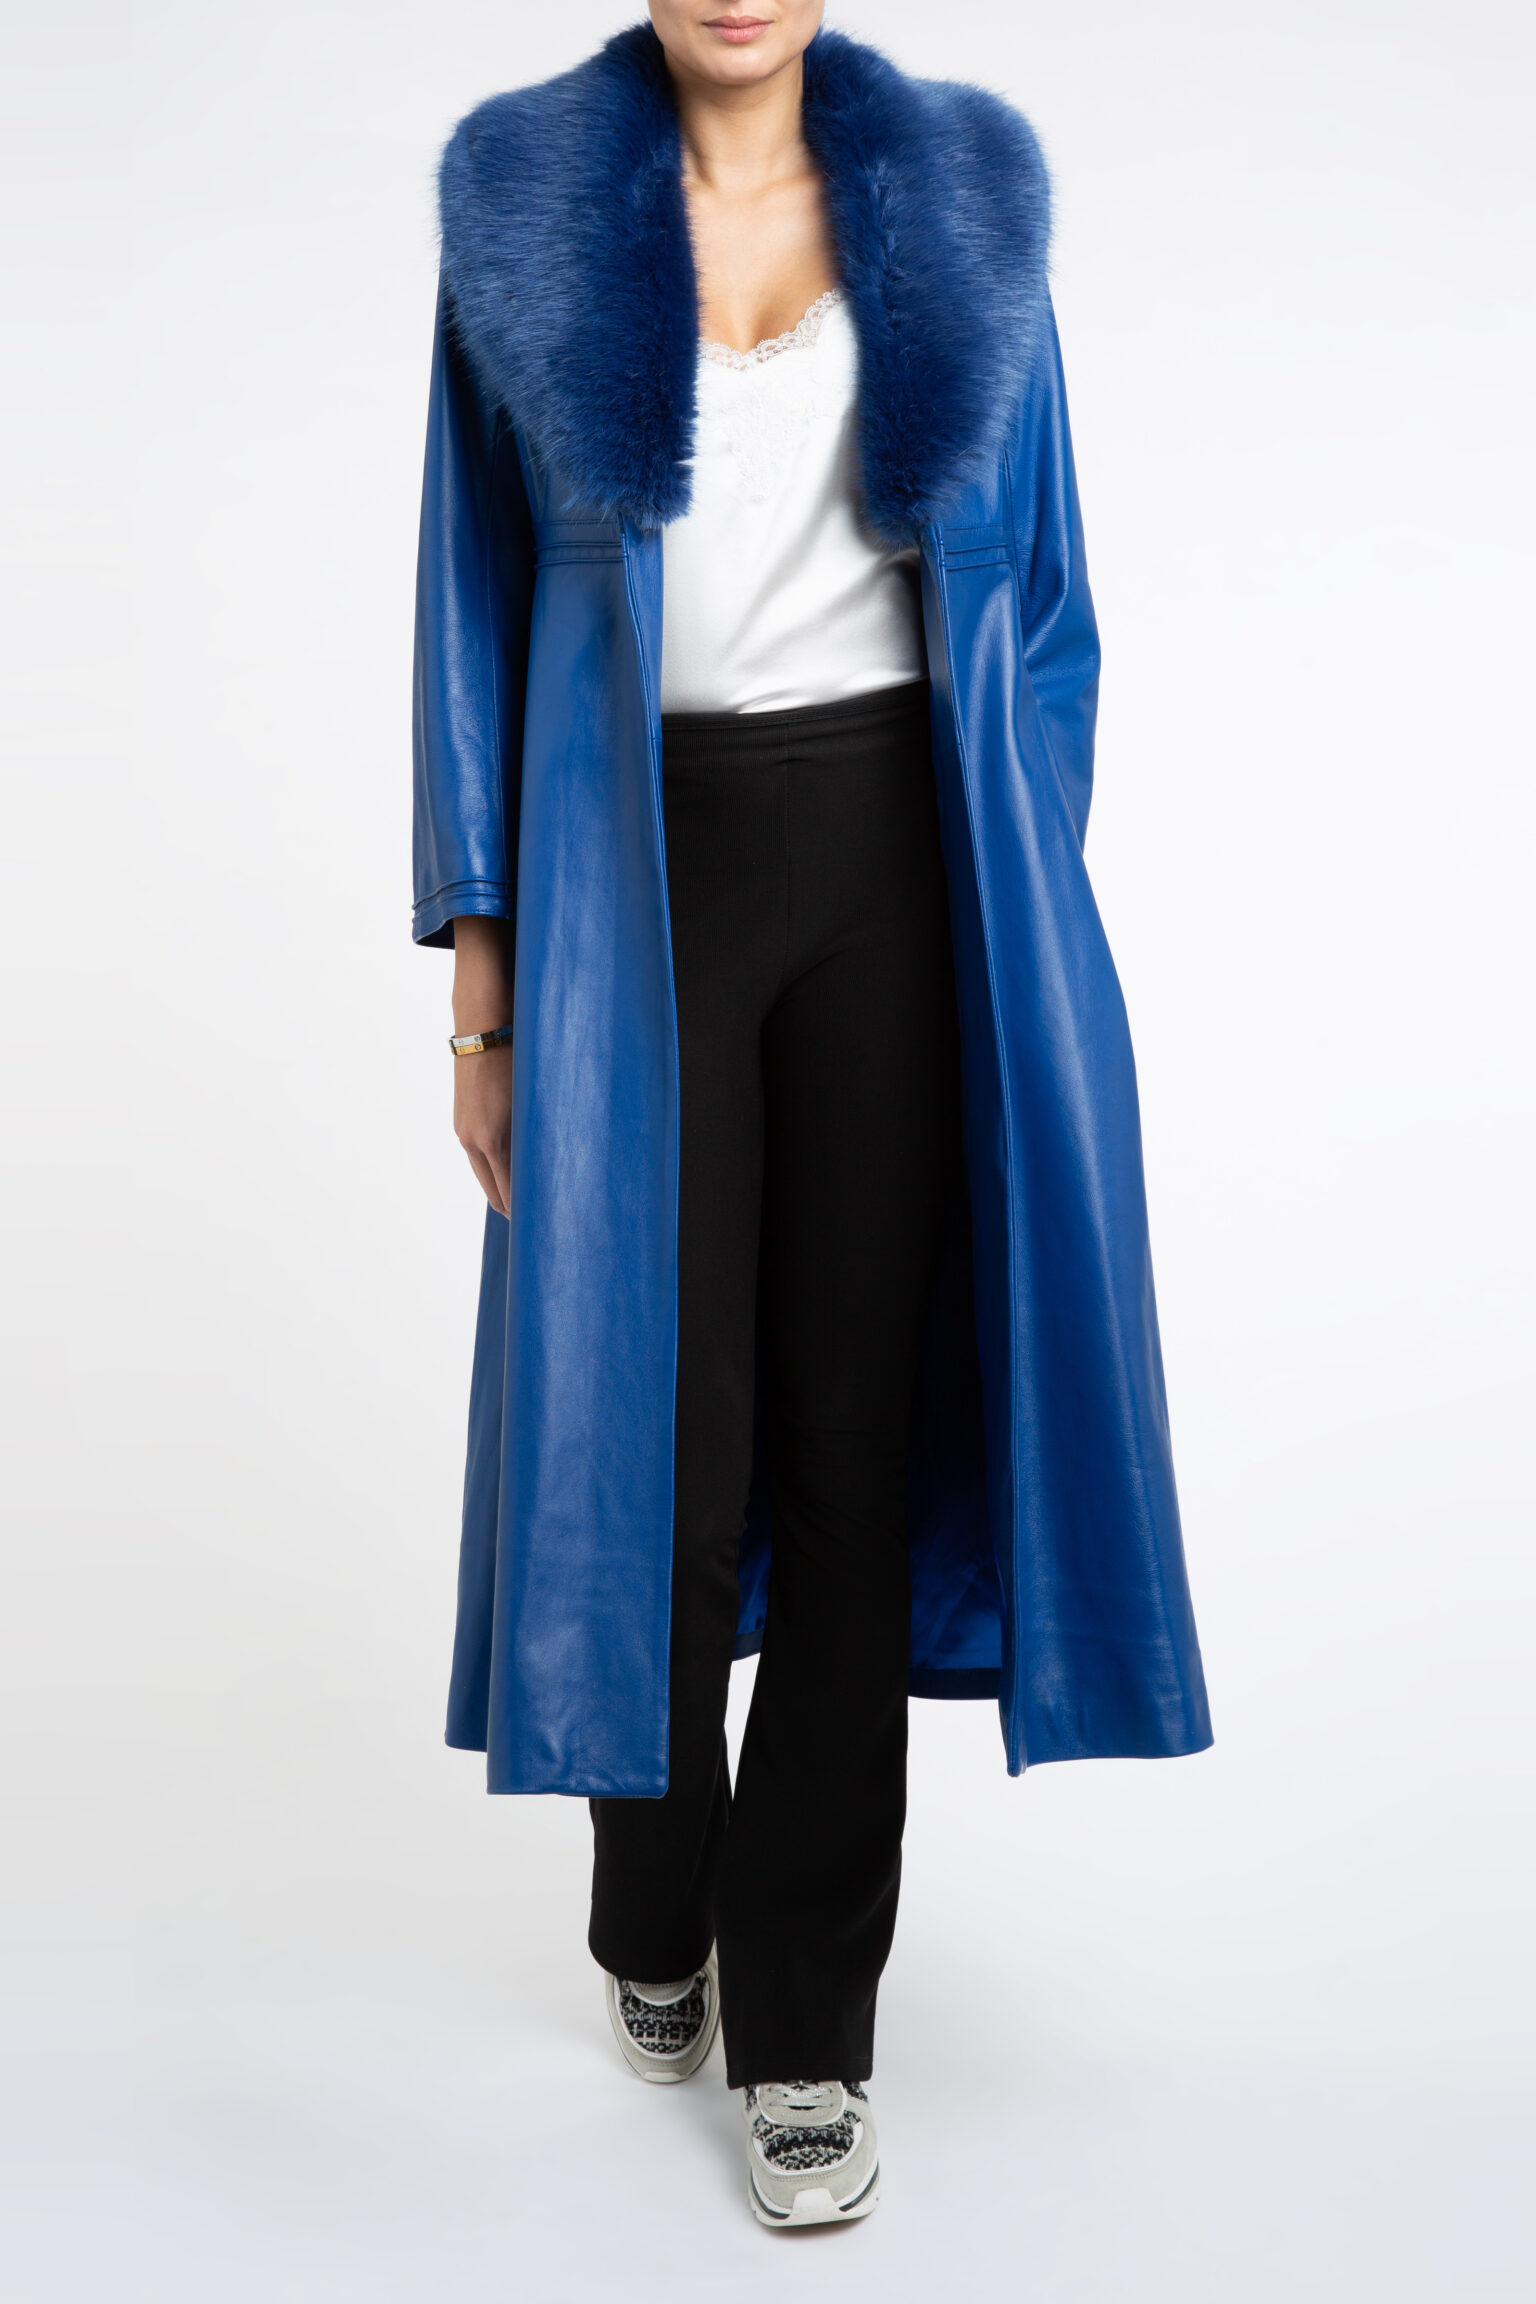 Edward Leather Trench Coat in Blue